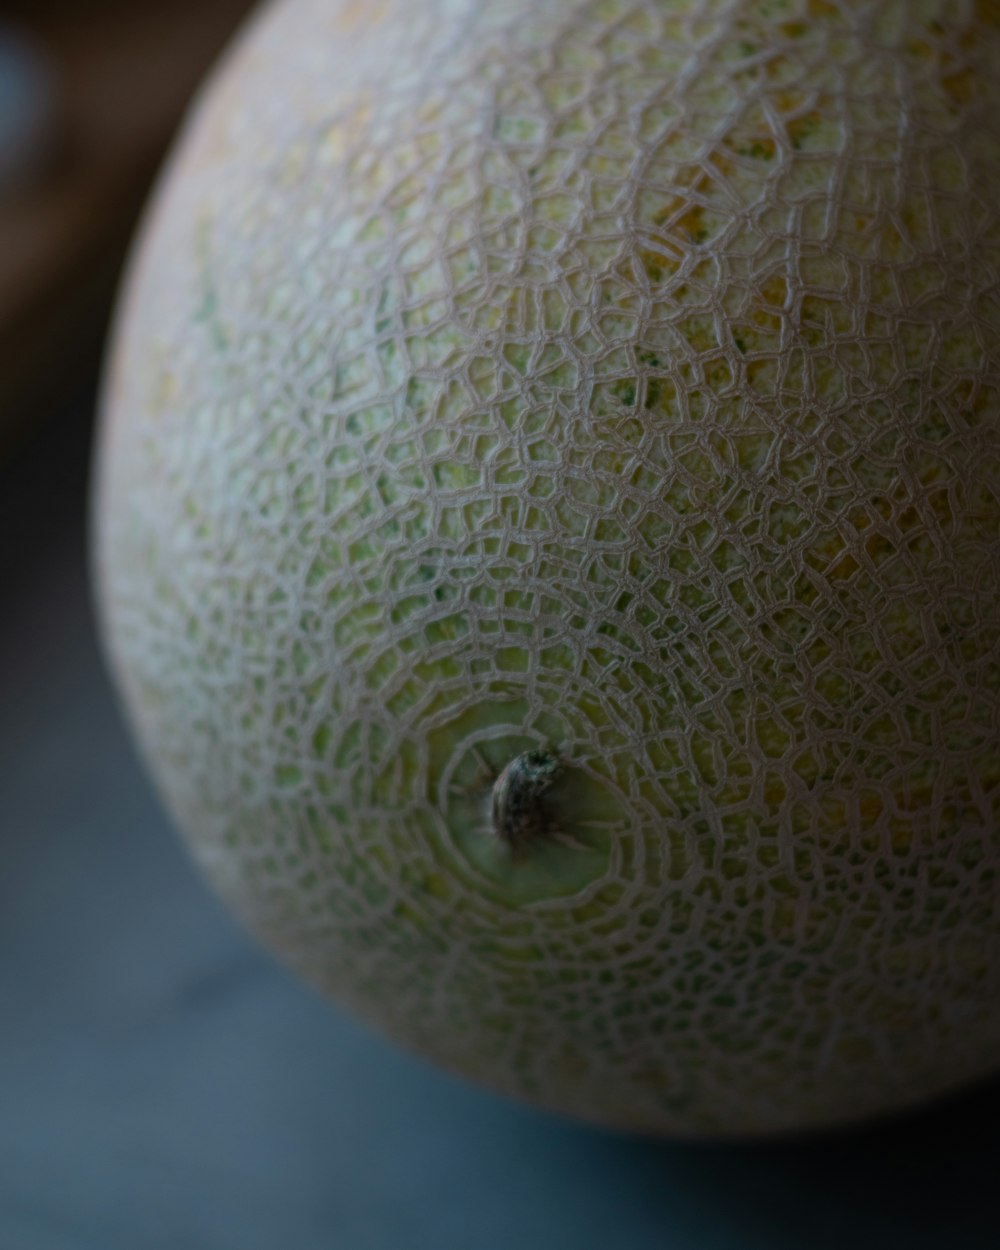 green round fruit with water droplets